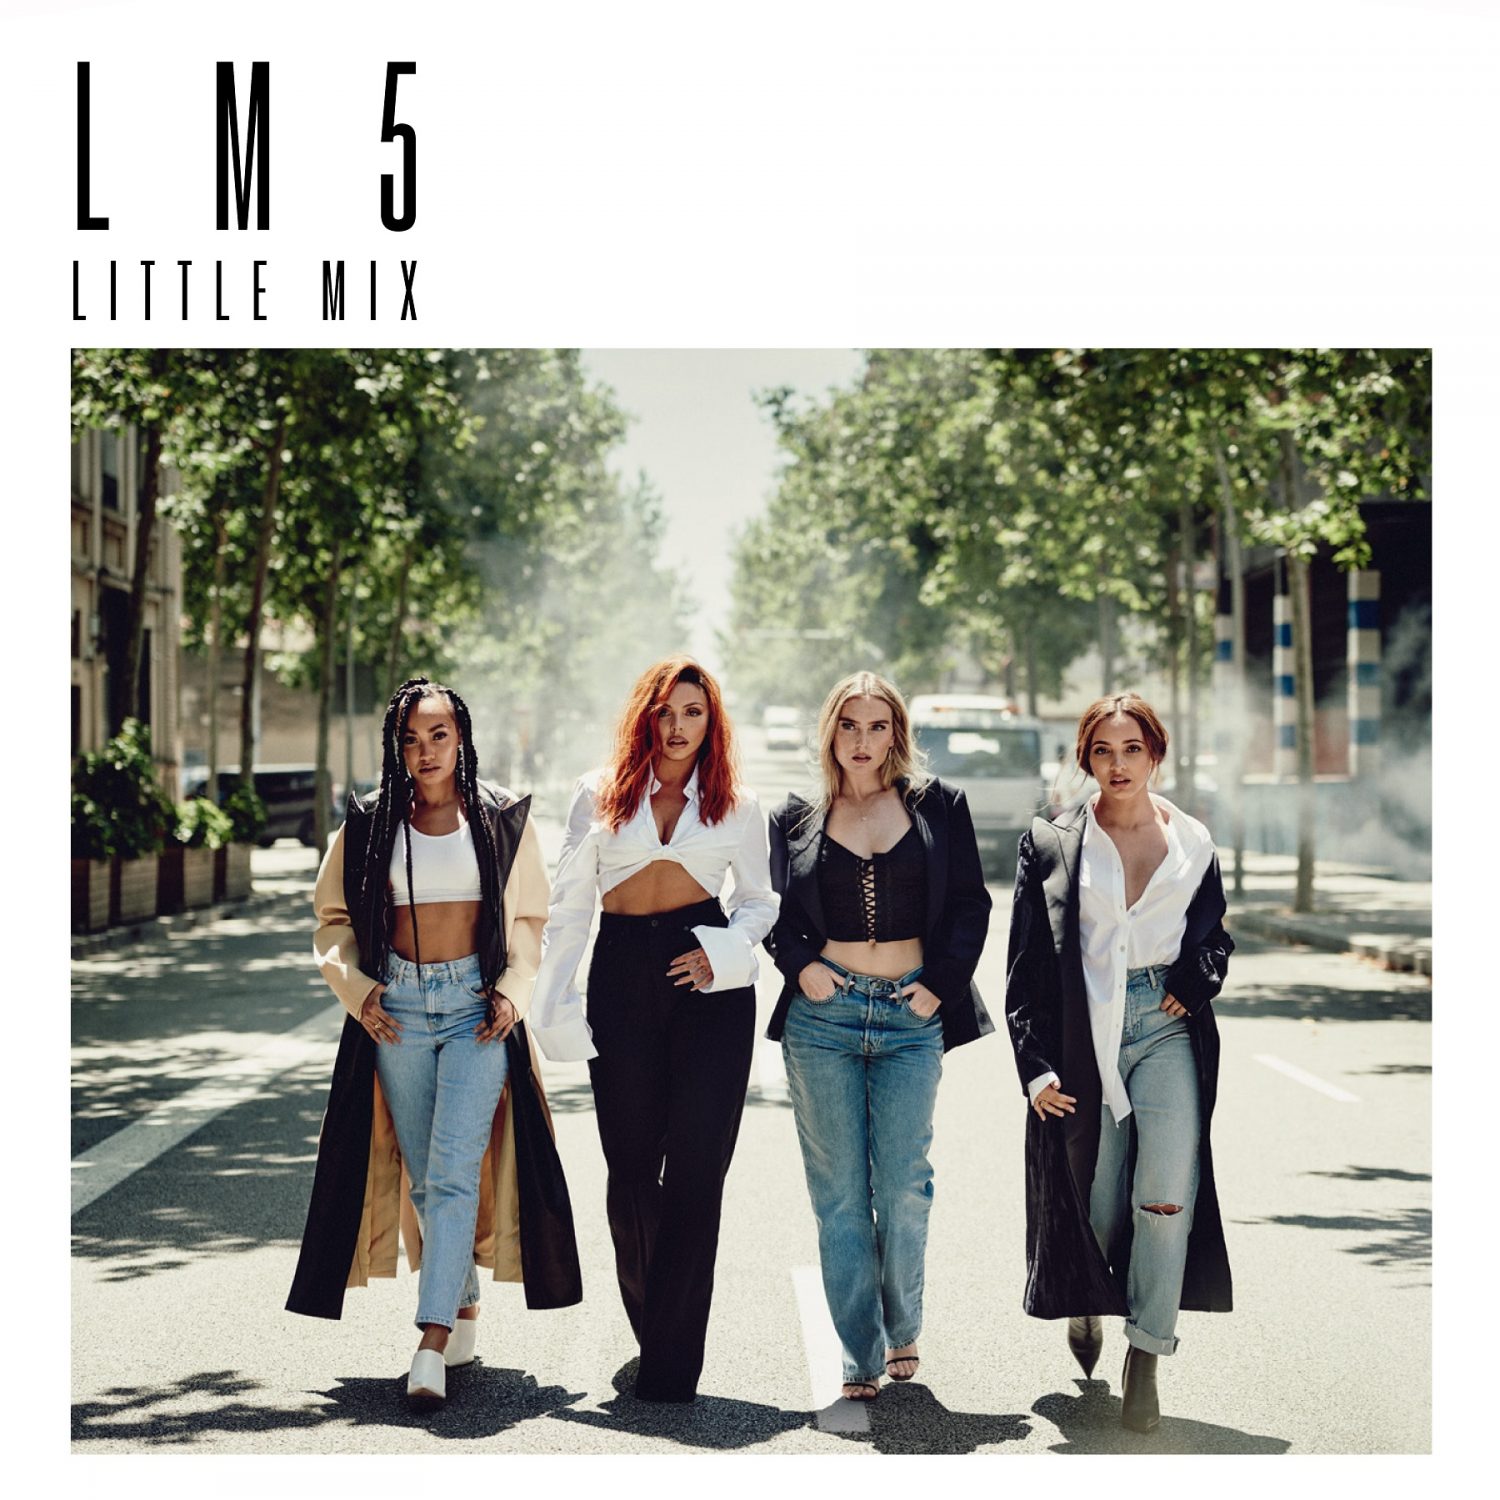 Little Mix – “LM5“ (SYCO Music/Sony Music)